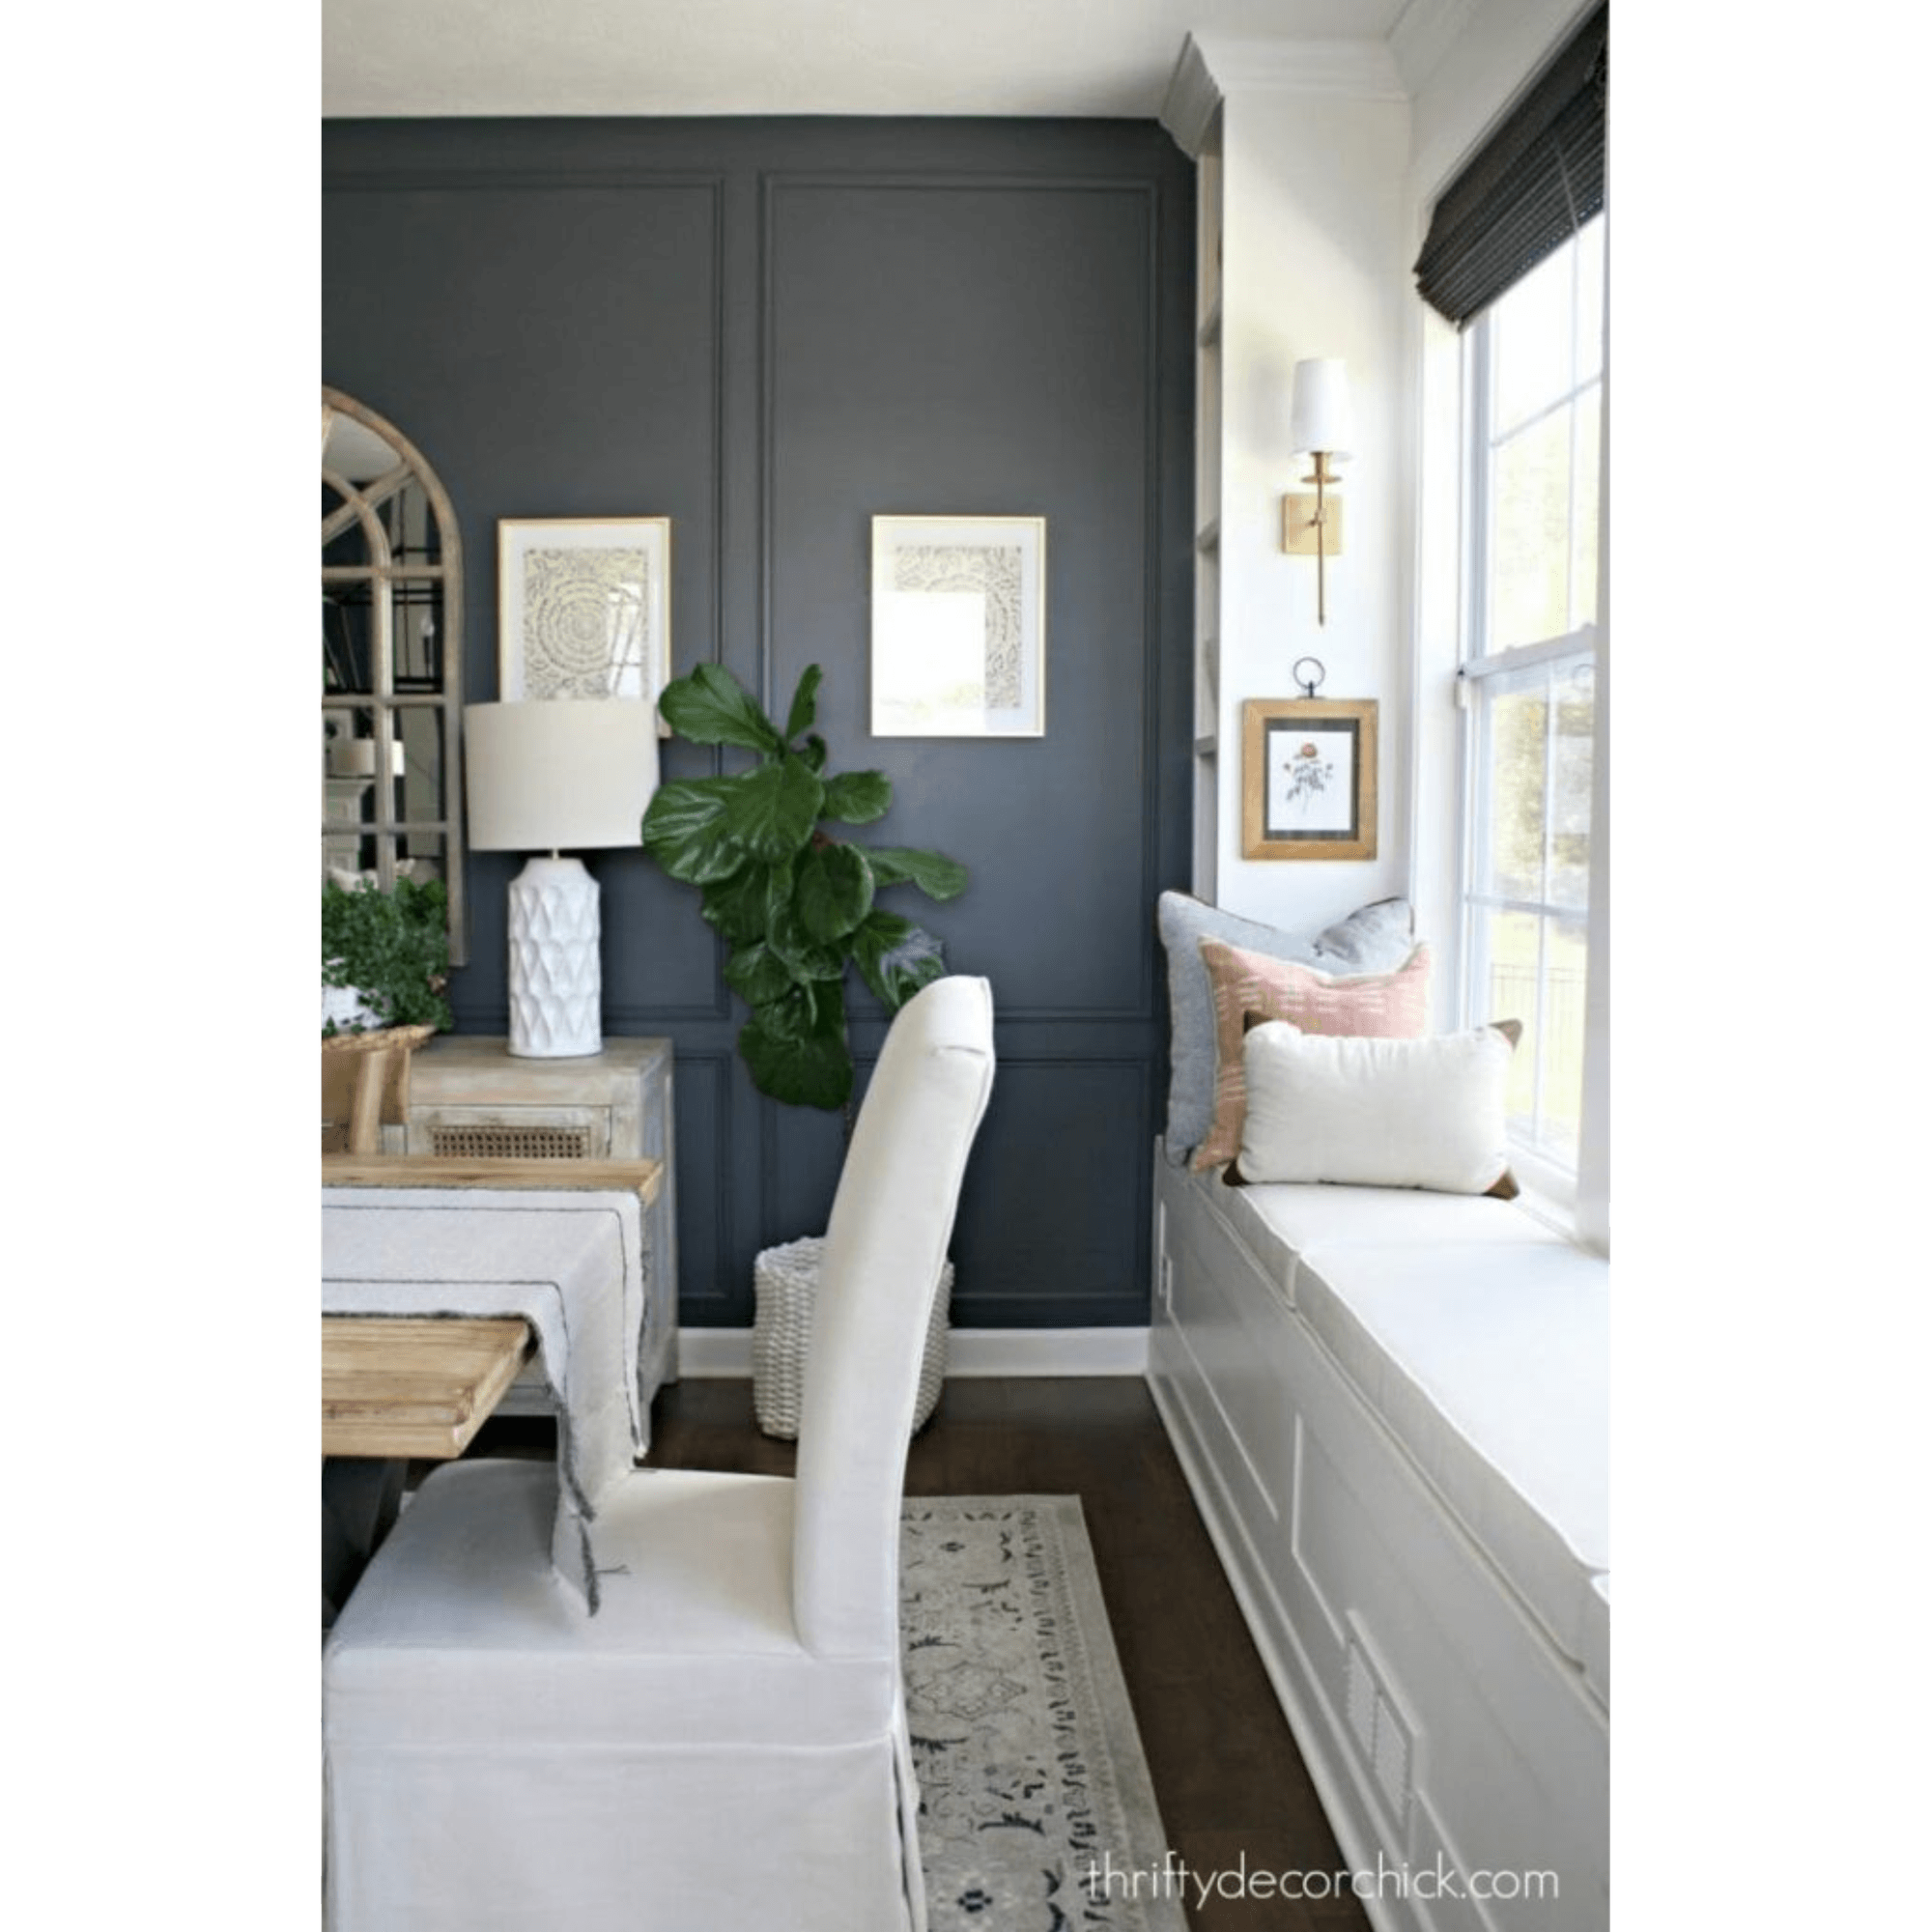 For Blog Only - Sarah of Thrifty Decor Chick - Narrow Black Panel Moulding Accent Wall